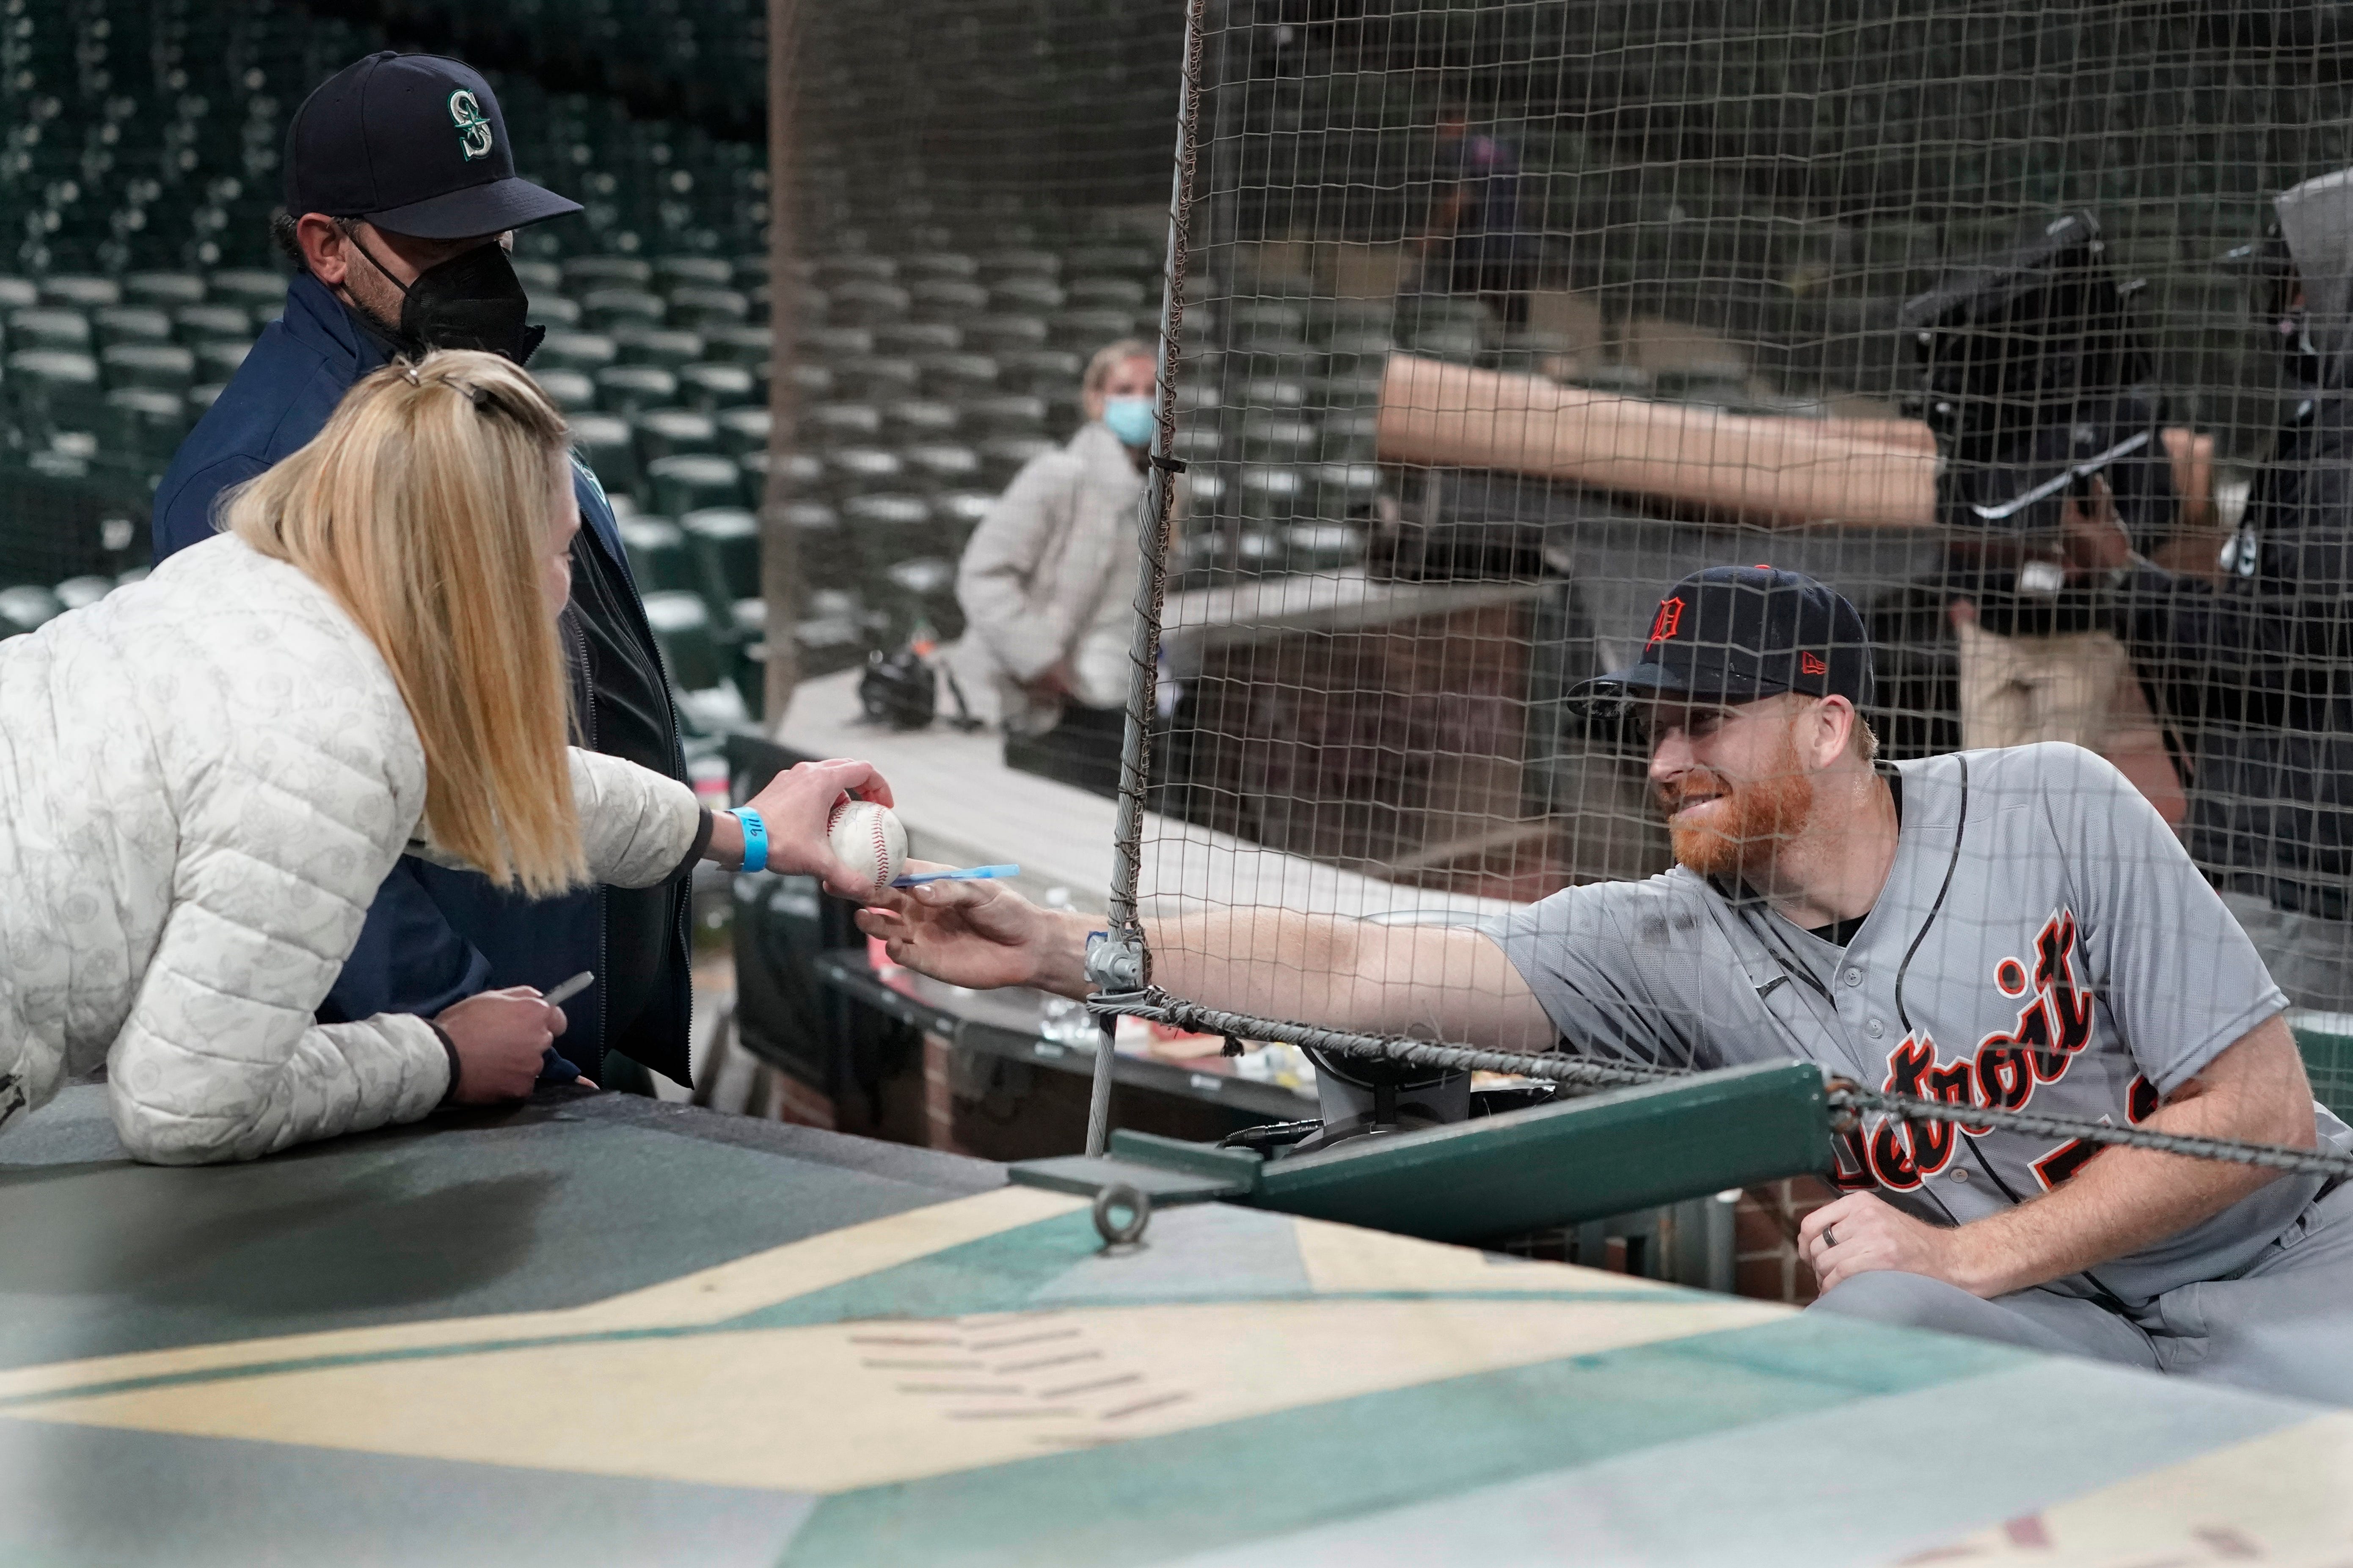 Detroit Tigers starting pitcher Spencer Turnbull, right, signs a baseball for a fan after he threw a no-hitter baseball game against the Seattle Mariners, Tuesday, May 18, 2021, in Seattle.